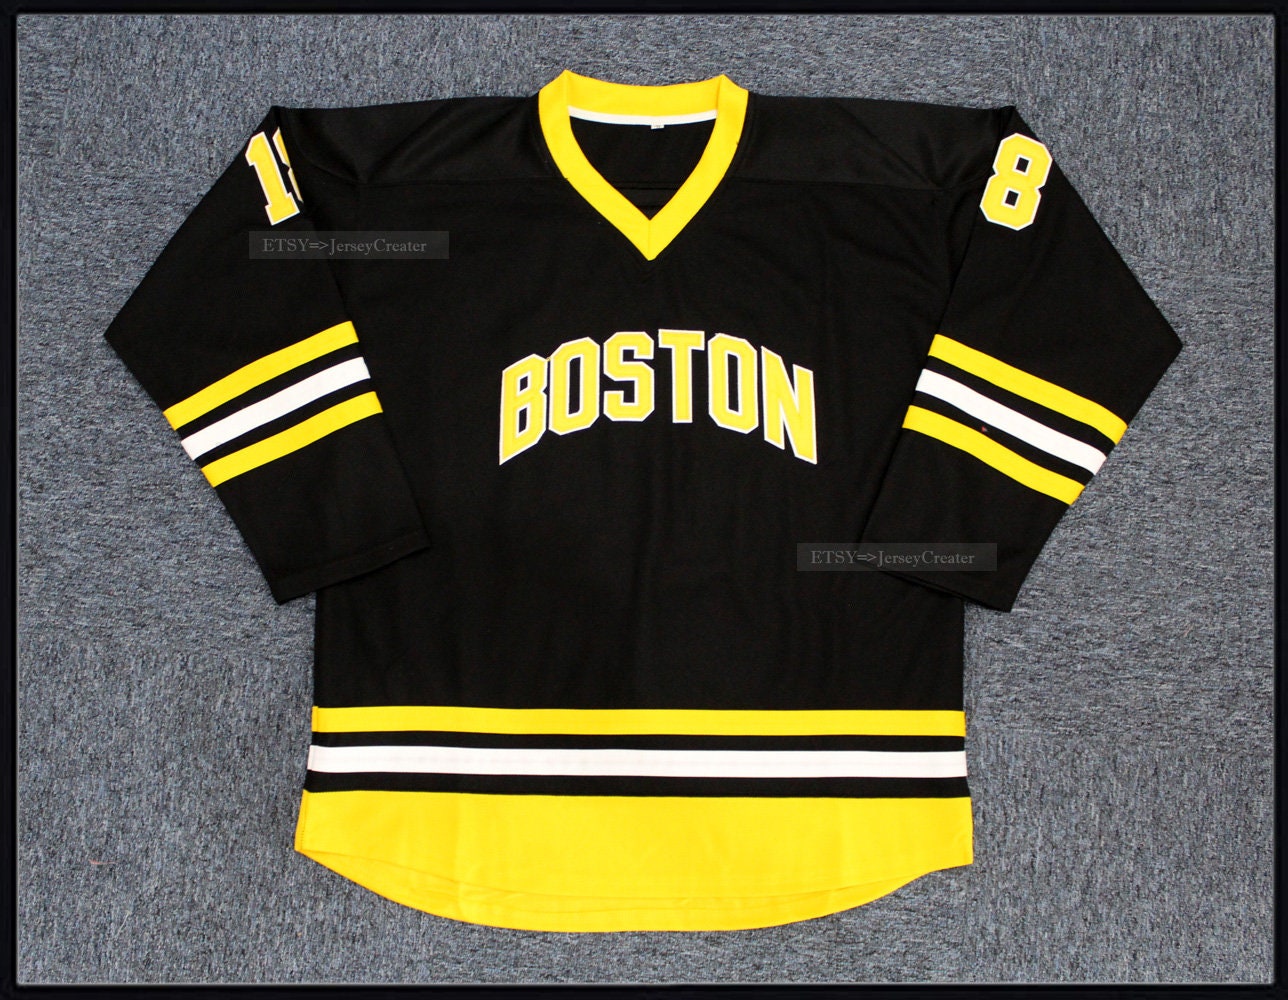 Ice Hockey Jersey Happy Gilmore 18 Boston Adam Sandler 1996 Movie Sport  Sweater Stitched Letters Numbers Black Sport cloth - AliExpress